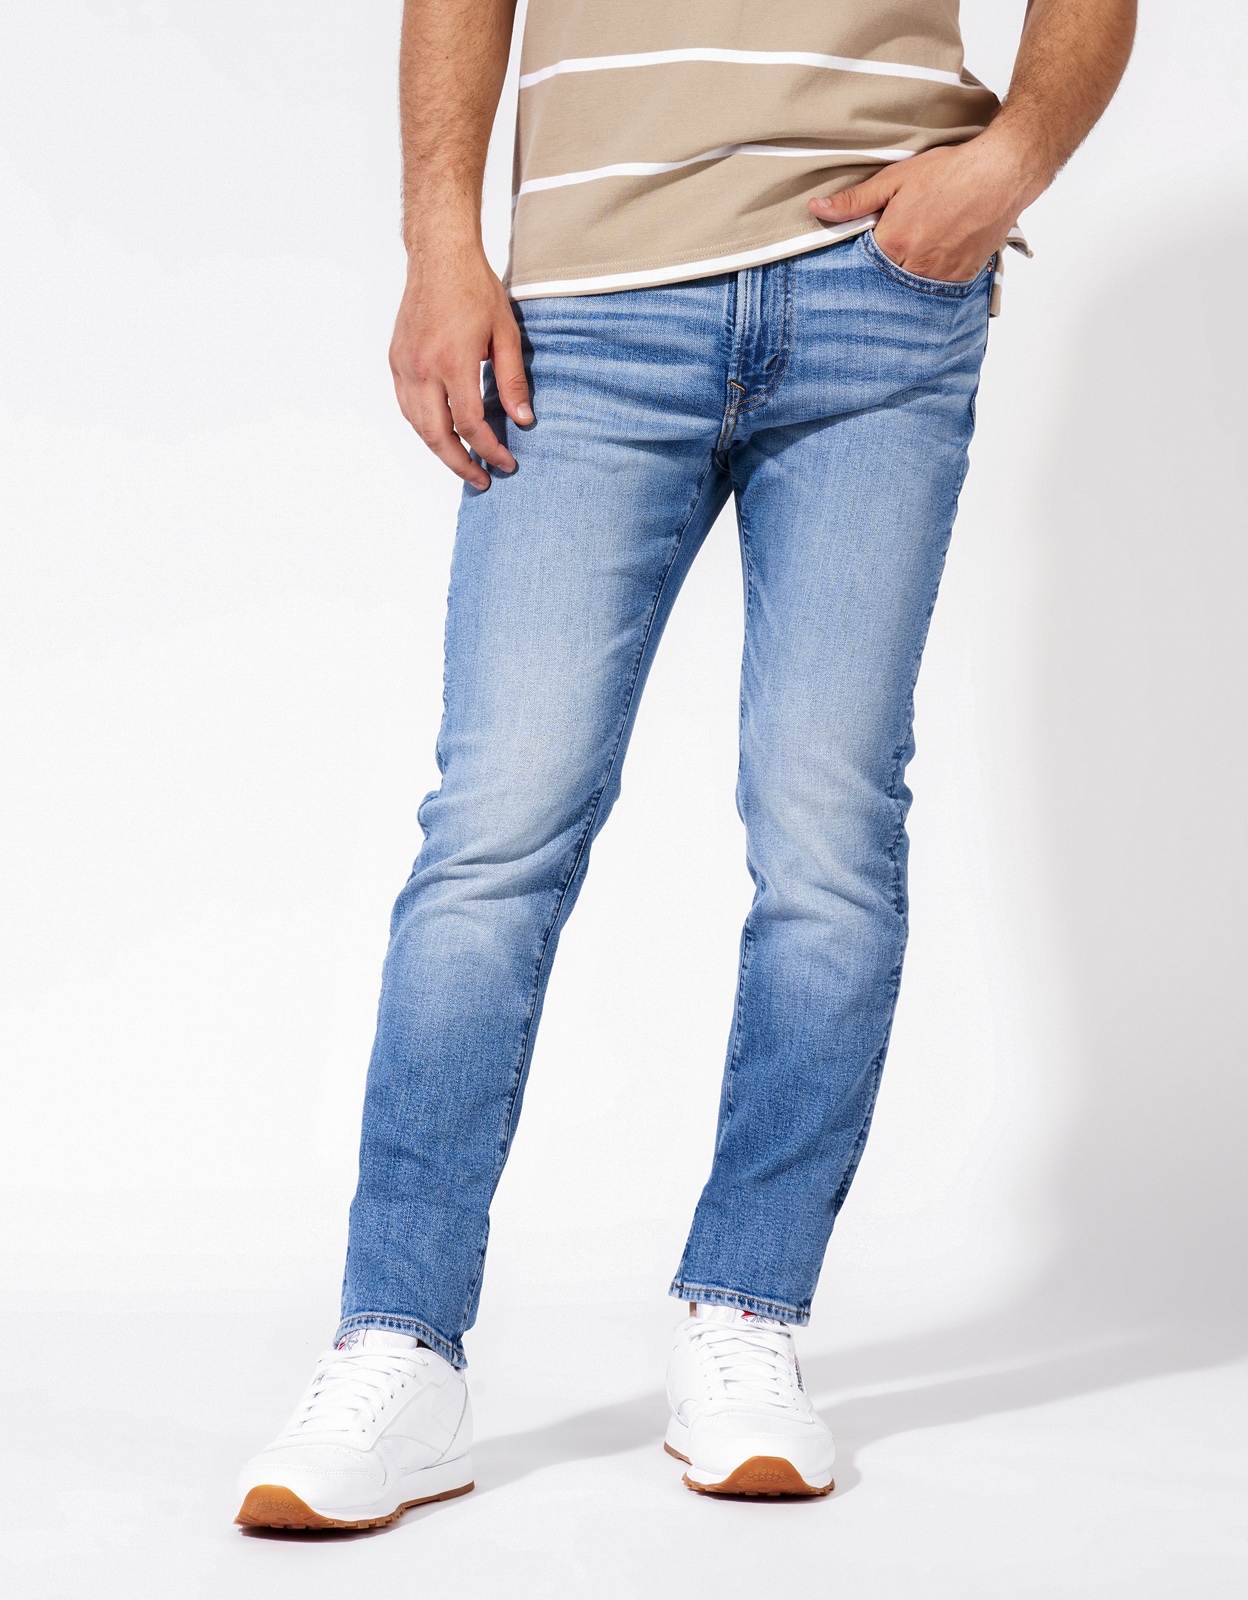 Shop AE AirFlex+ Slim Straight Jean online | American Eagle Outfitters ...